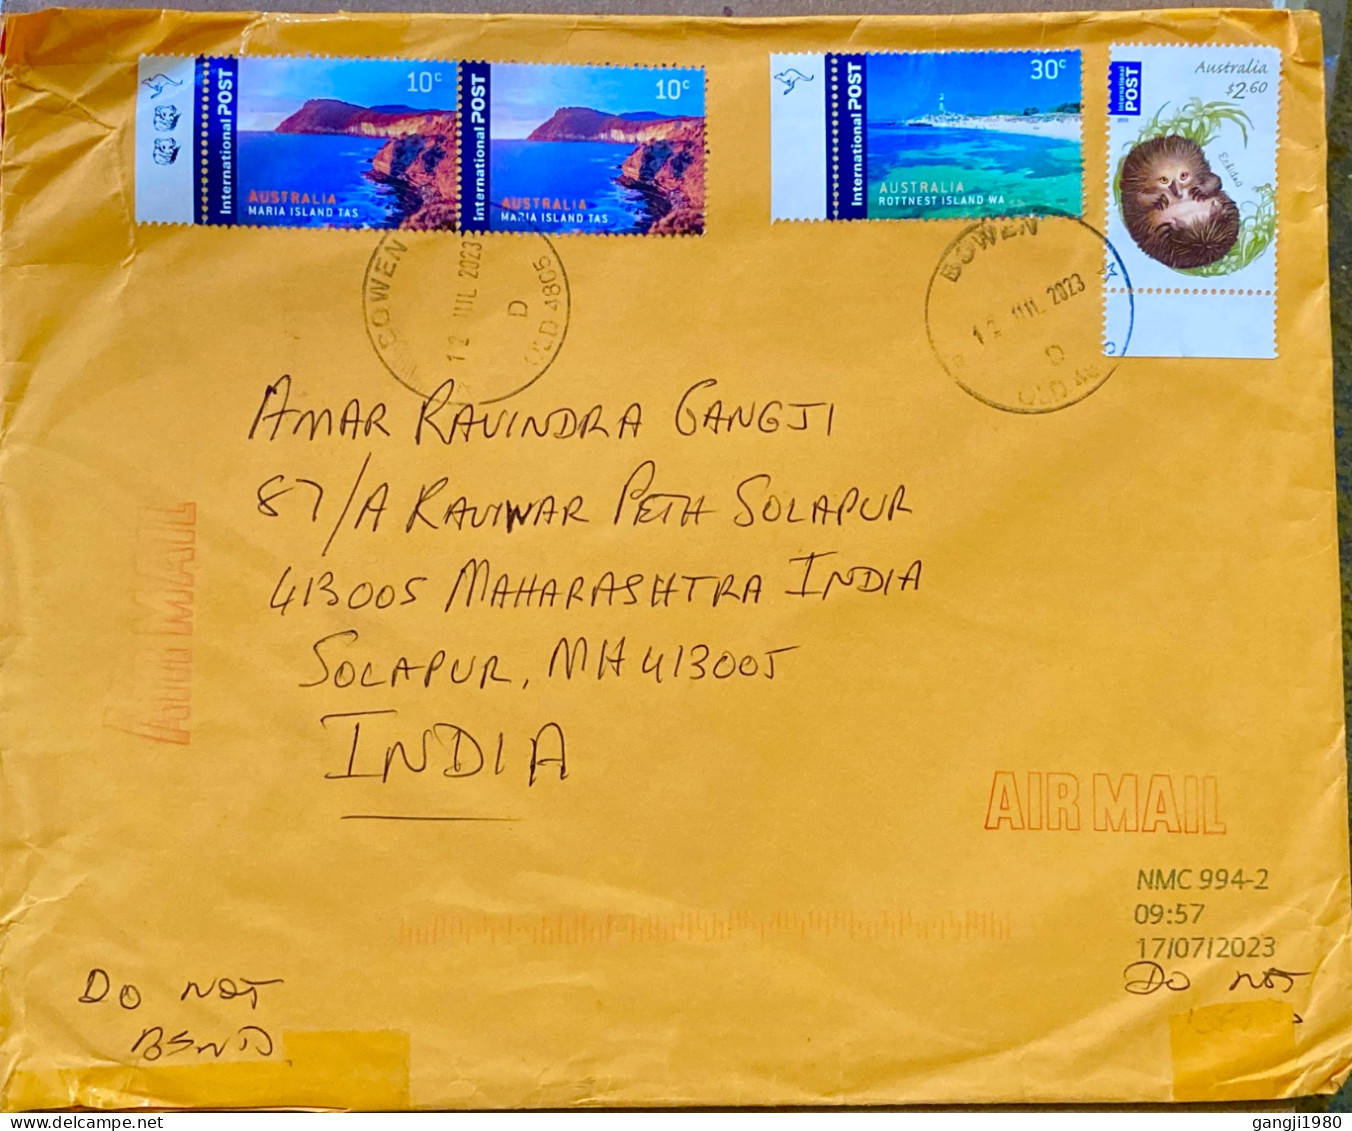 AUSTRALIA -2023, COVER USED TO INDIA, INTERNATION POST, ECHIDNA ANIMAL, ROTTAREST & MARIA ISLAND 4 STAMP, BOWEN CITY CA - Covers & Documents